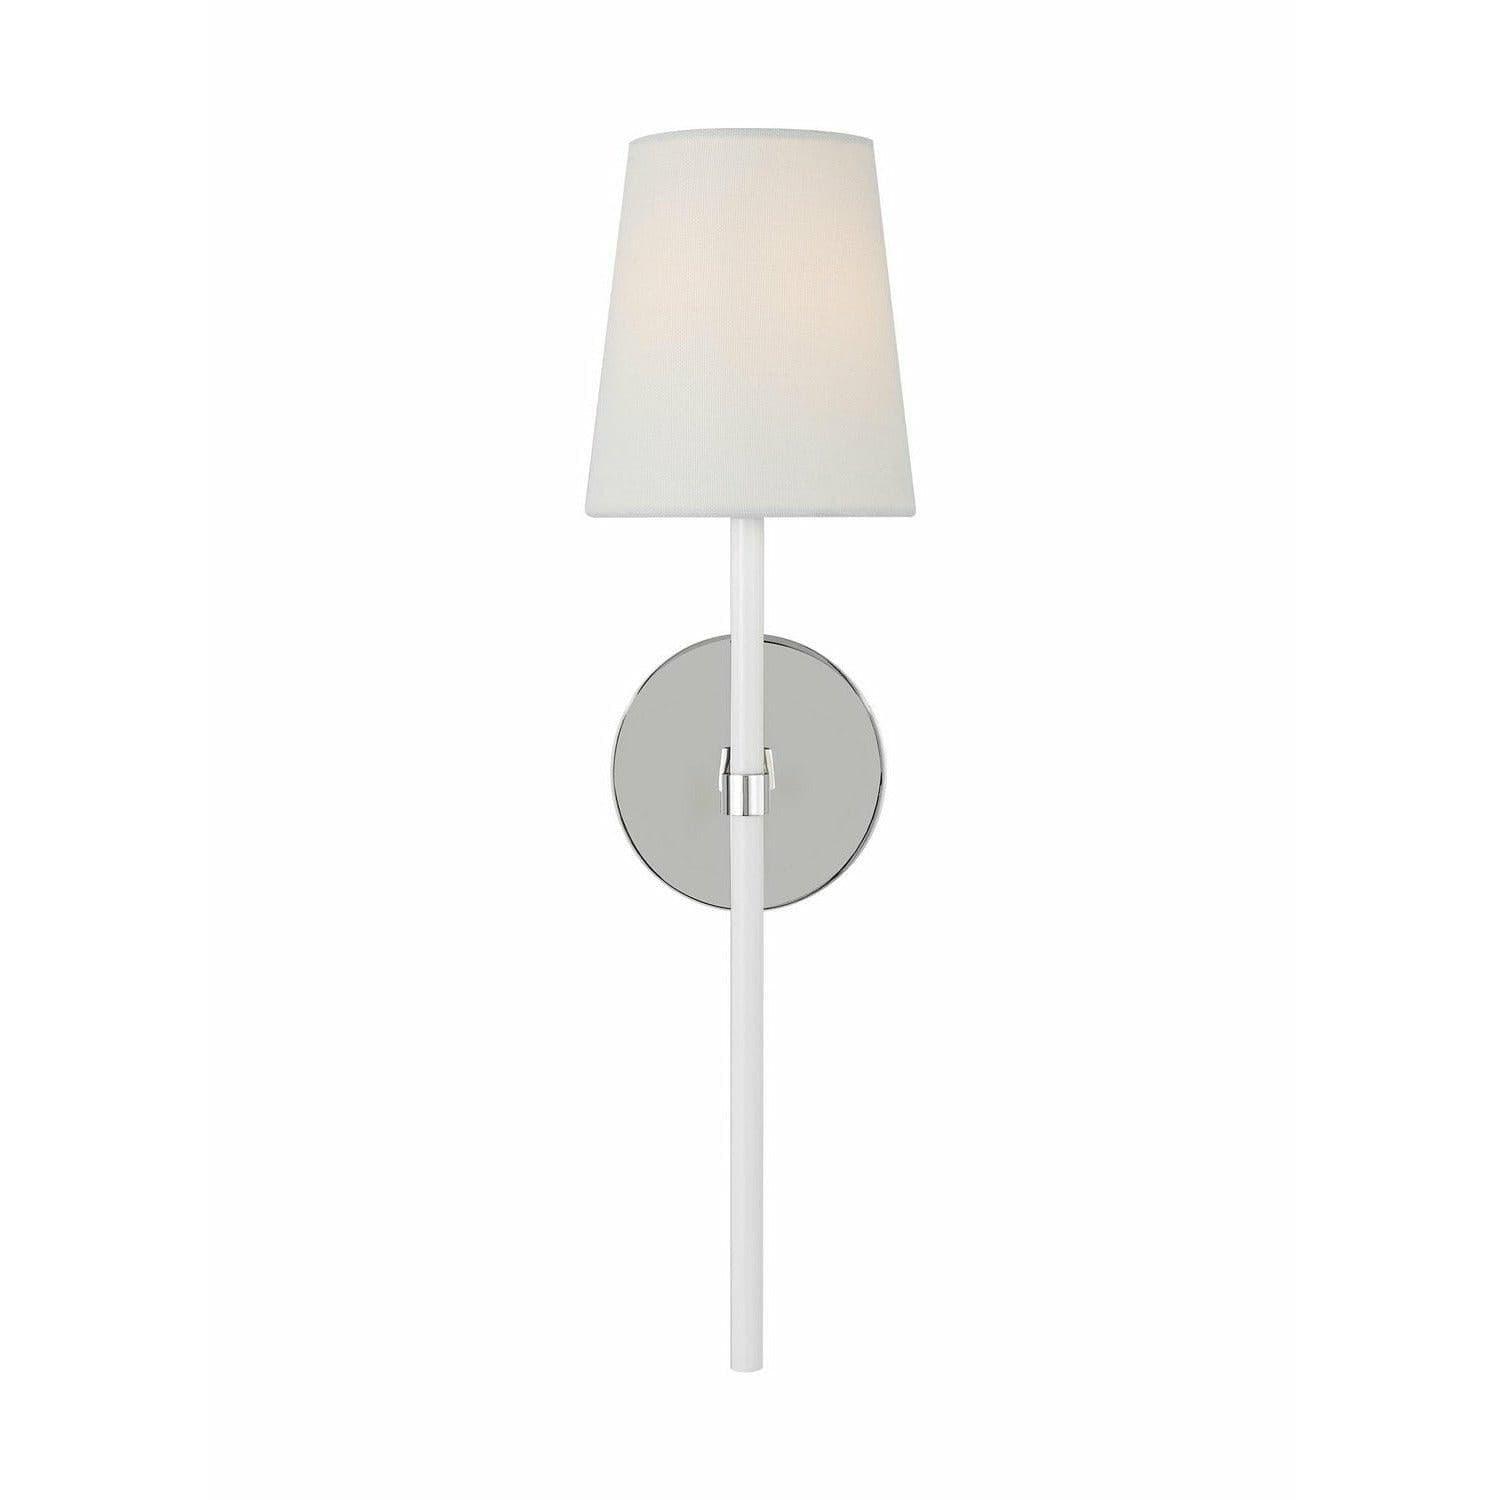 Visual Comfort Studio Collection - Monroe Tail Wall Sconce - KSW1091PNGW | Montreal Lighting & Hardware